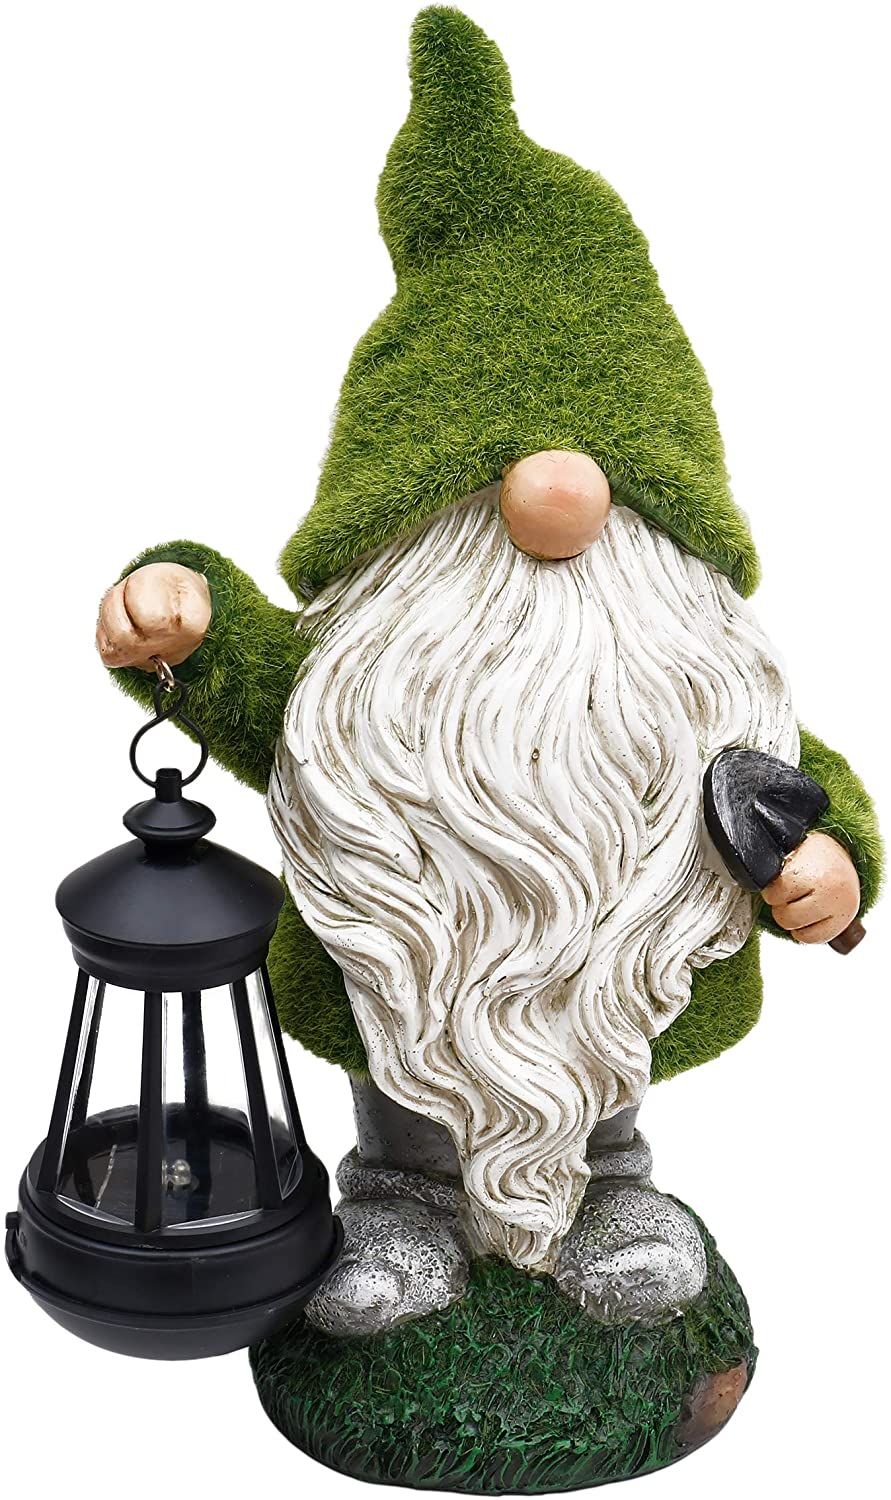 Teresa's Collections Flocked Garden Gnome With Solar Lights - $$title$$